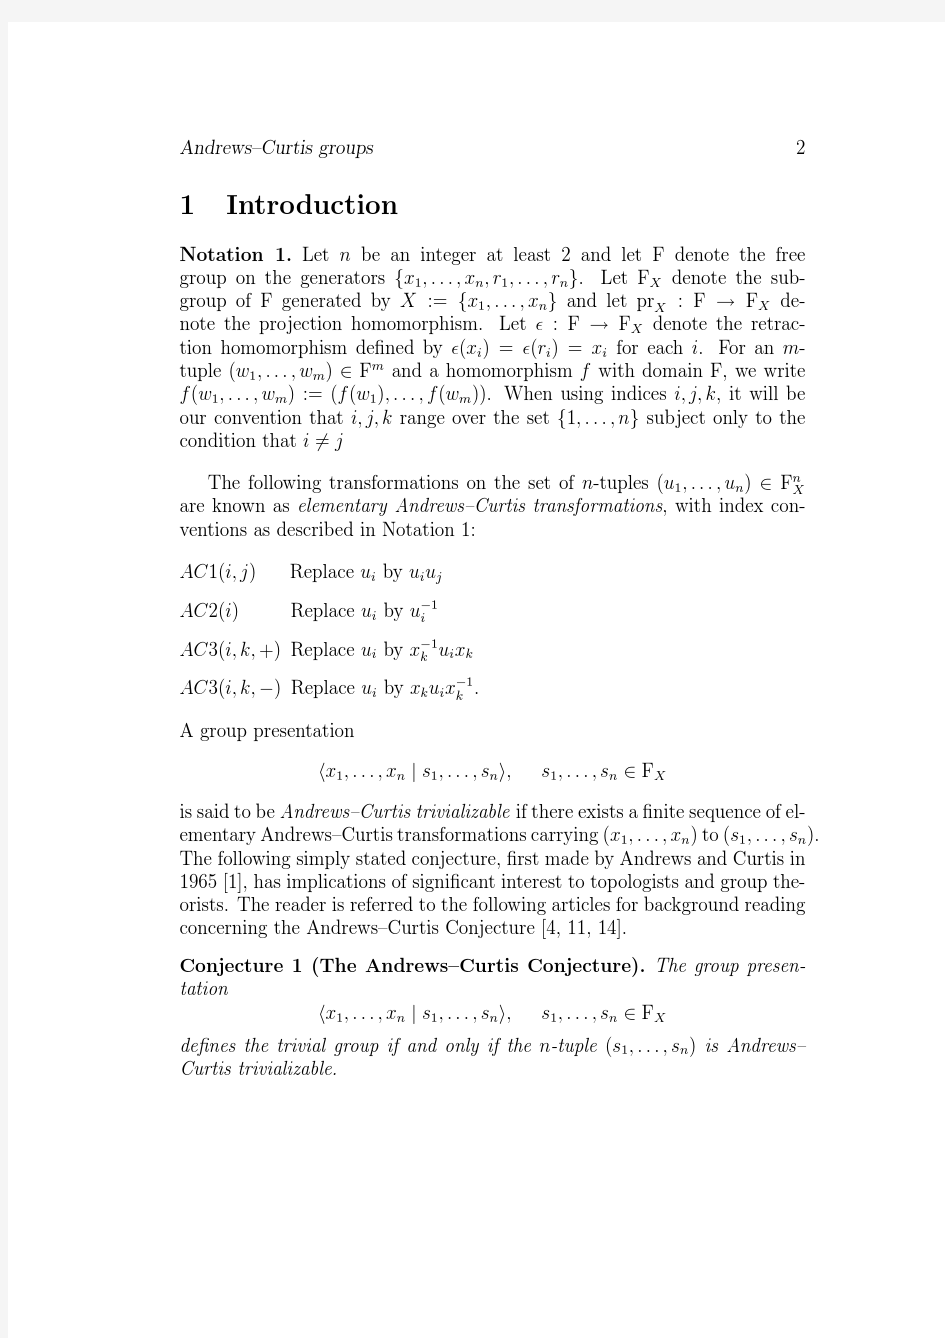 Andrews–Curtis groups and the Andrews–Curtis Conjecture